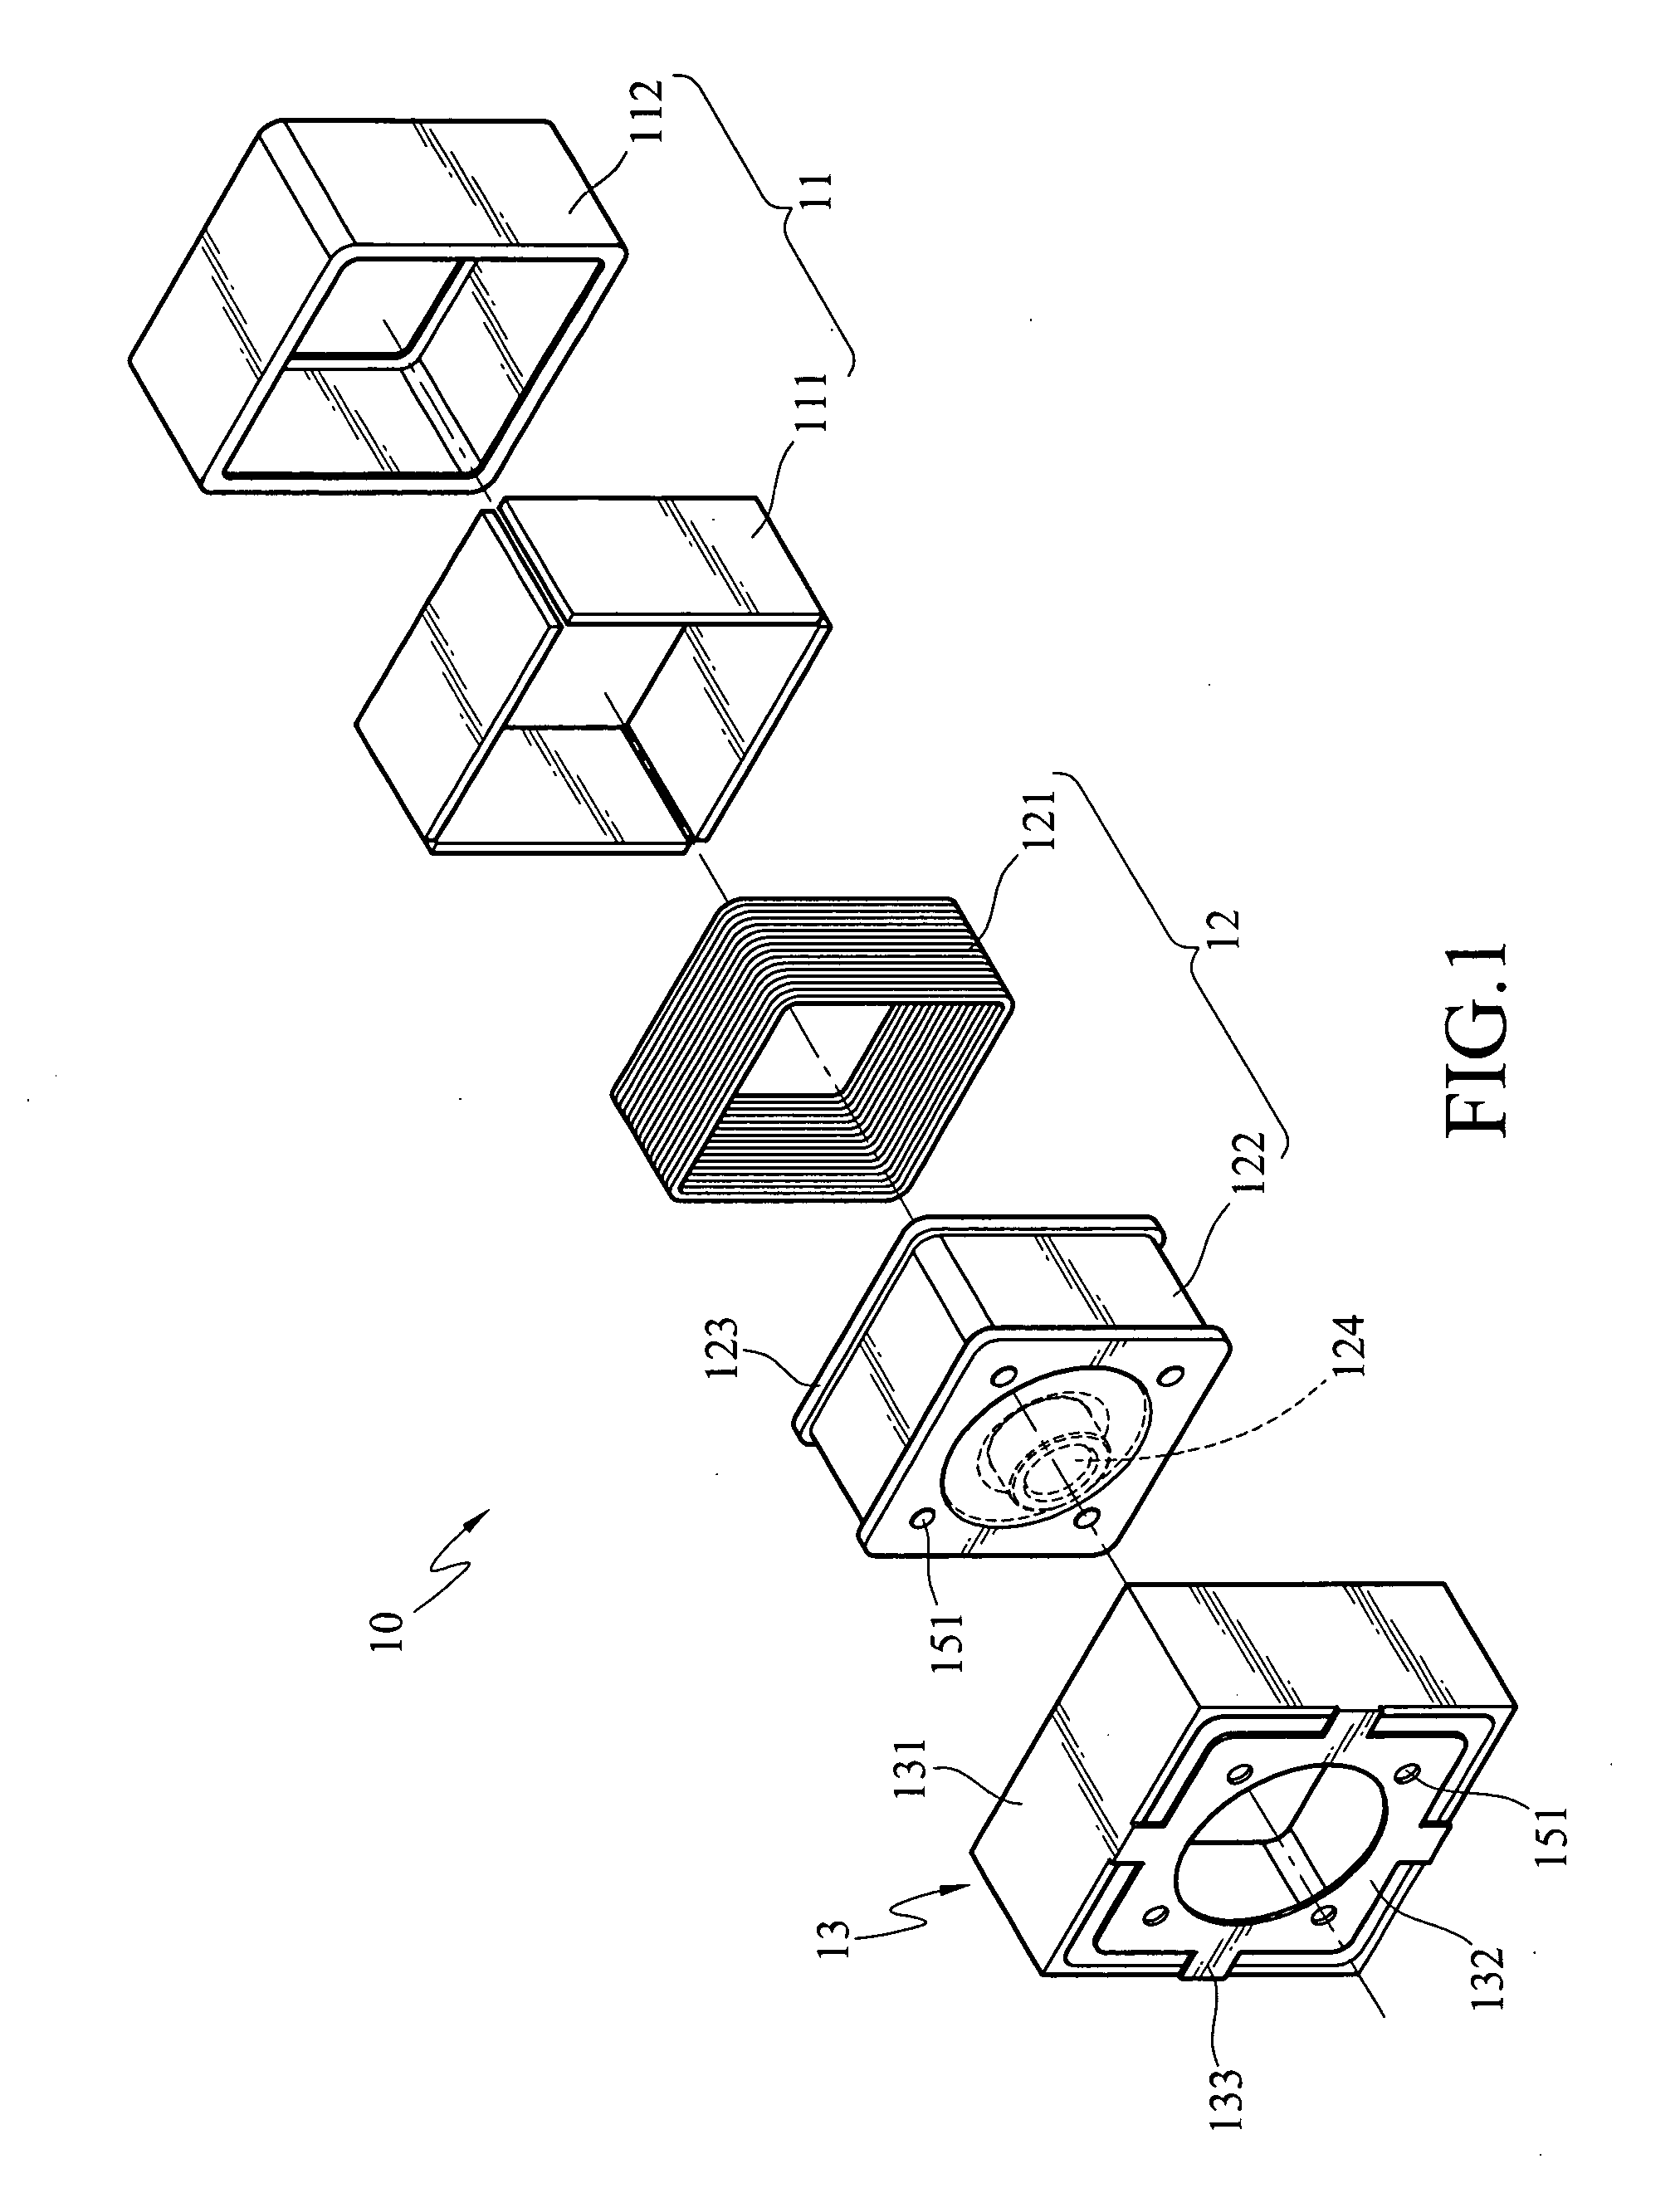 Axially actuating device having elastic joining portion